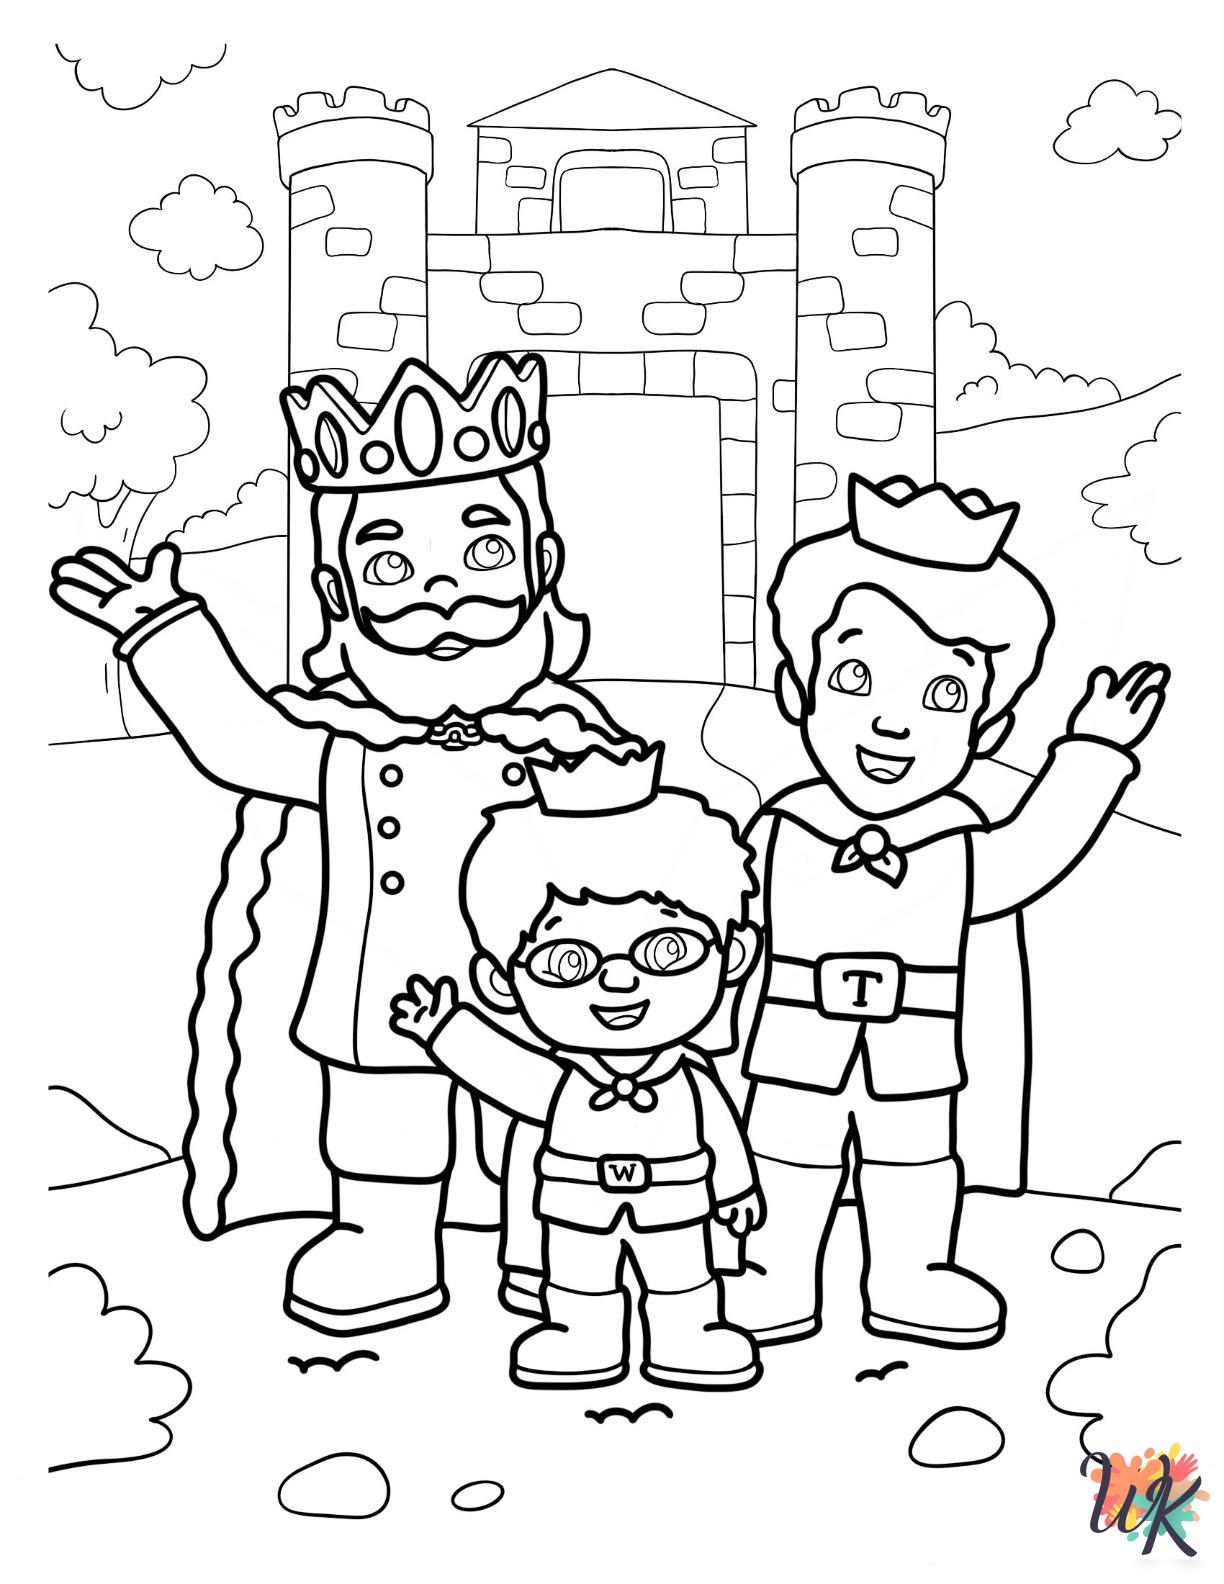 Daniel Tiger coloring pages grinch